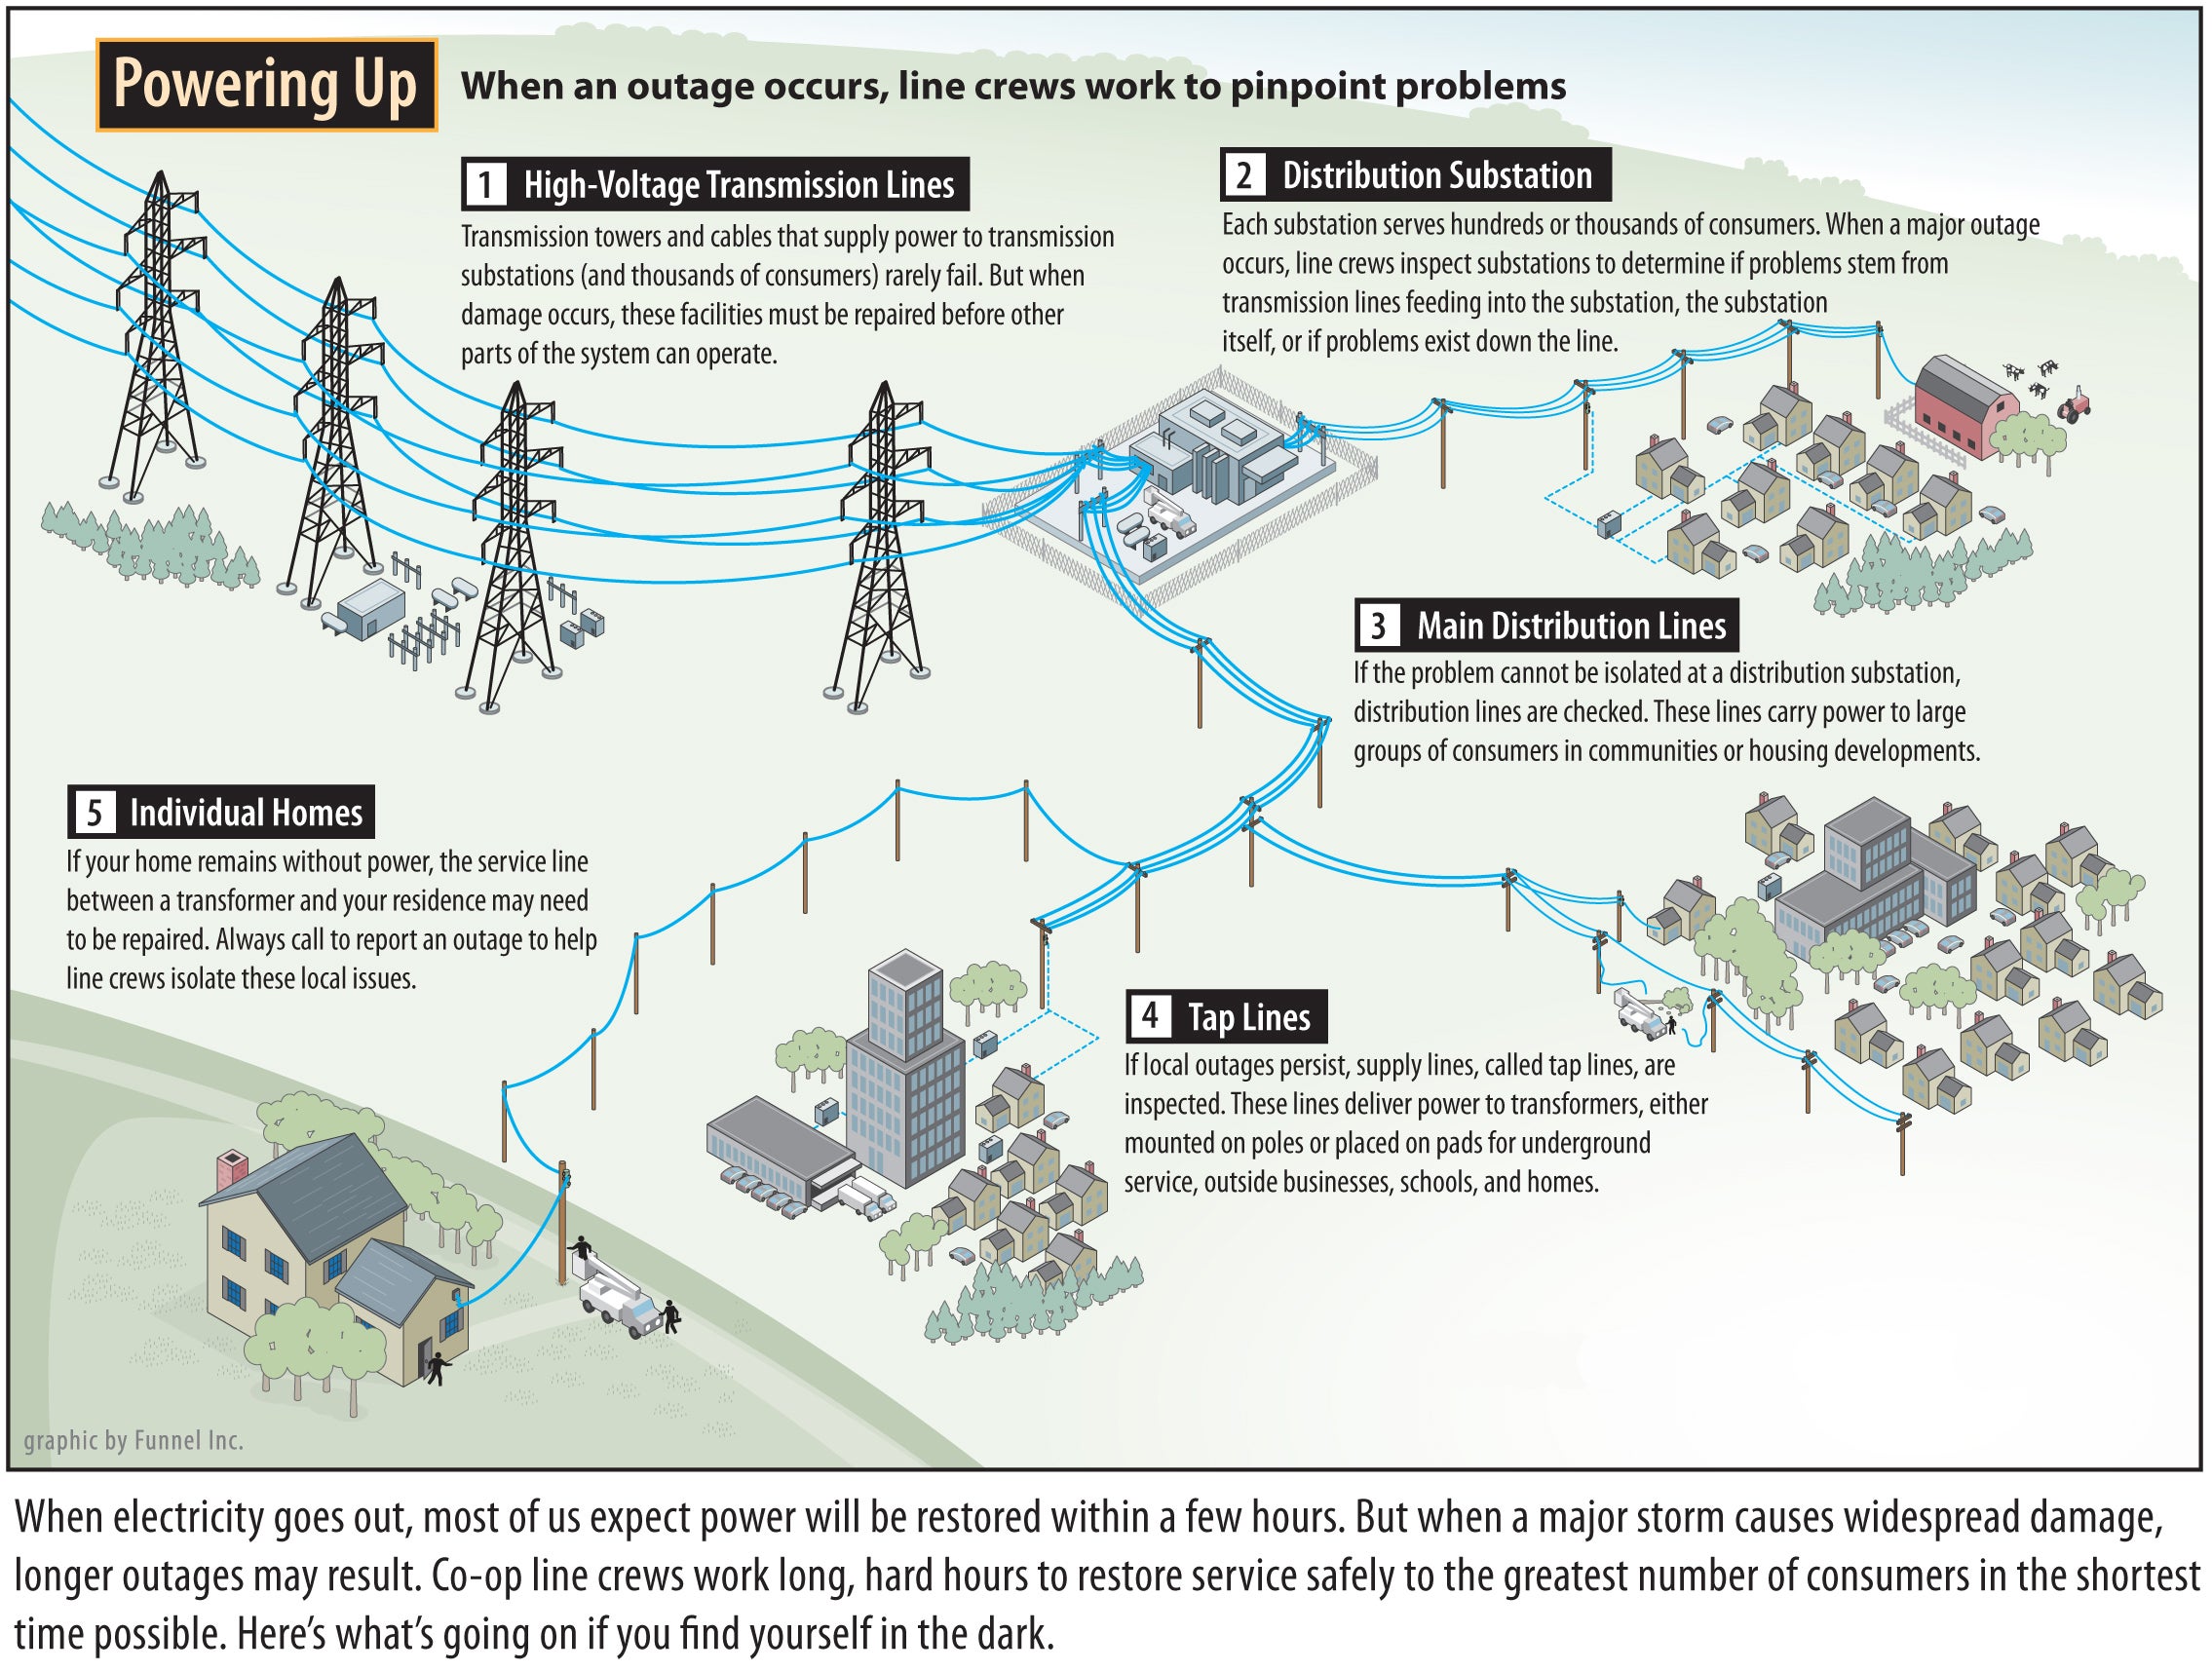 Restoring power takes many steps and time.